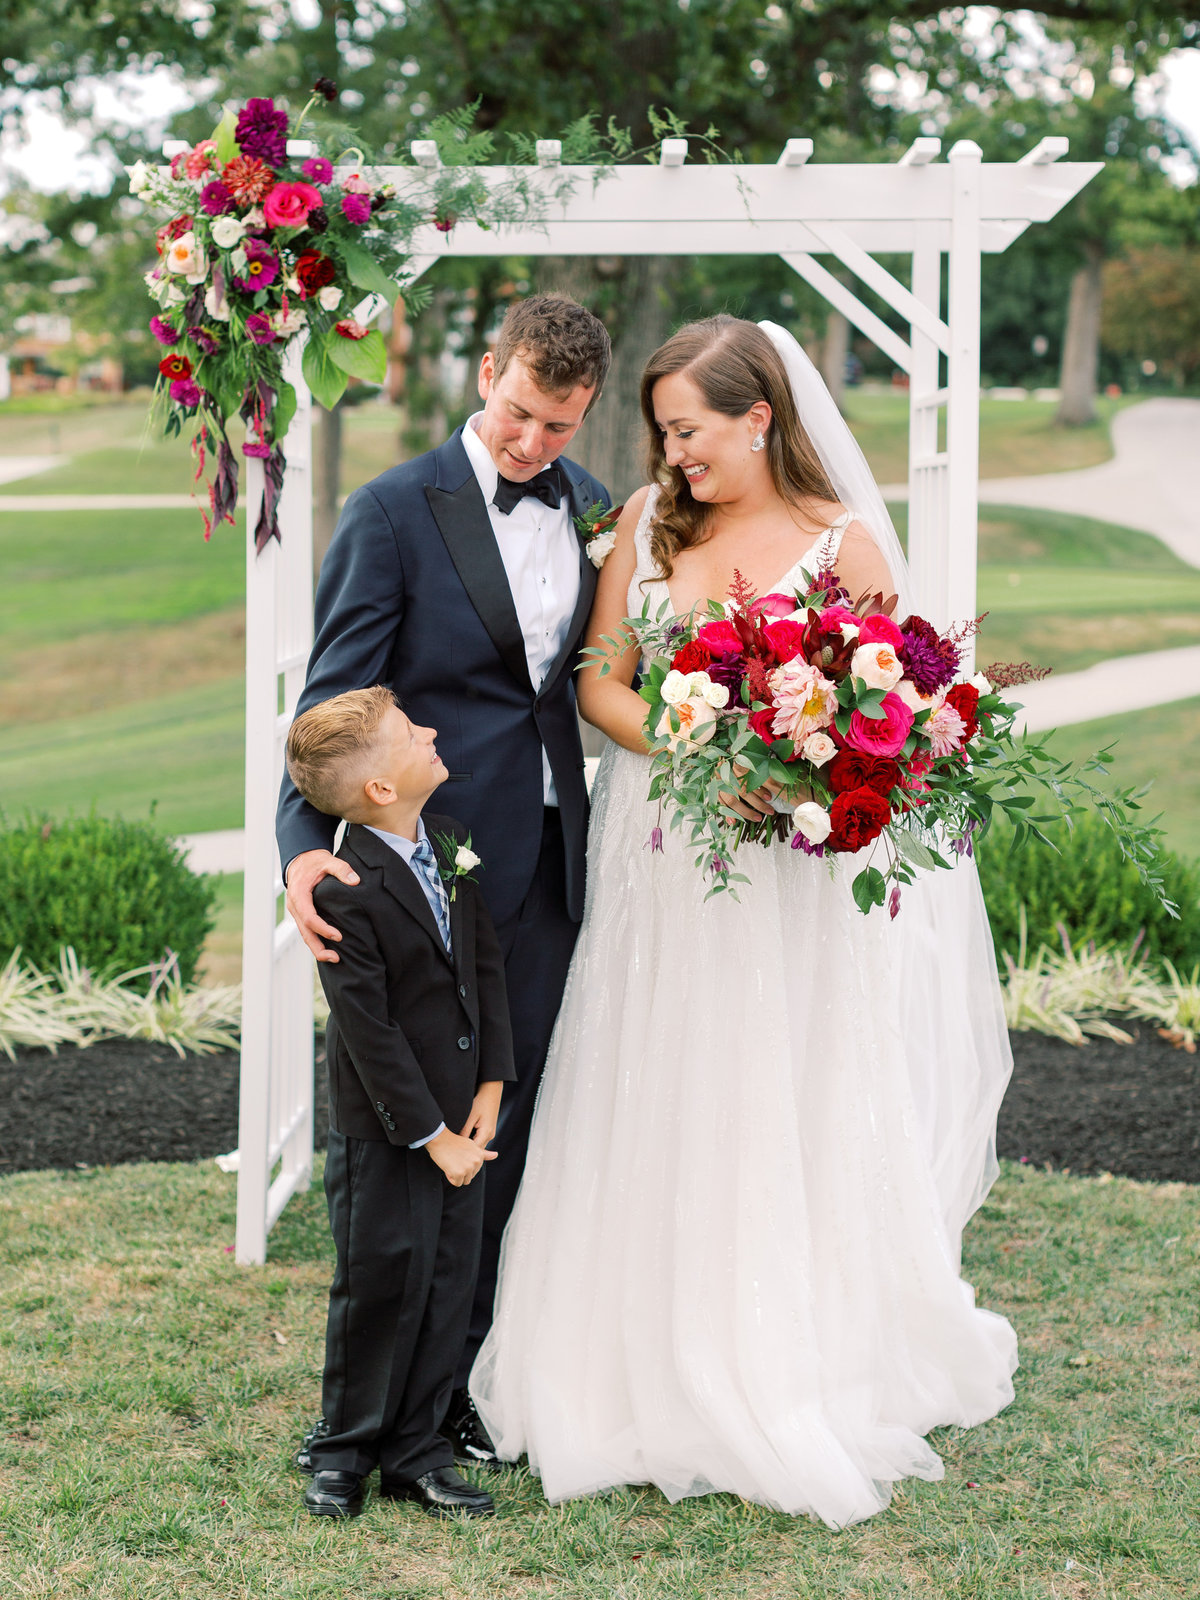 Bride, groom and ringbearer in front of floral arch